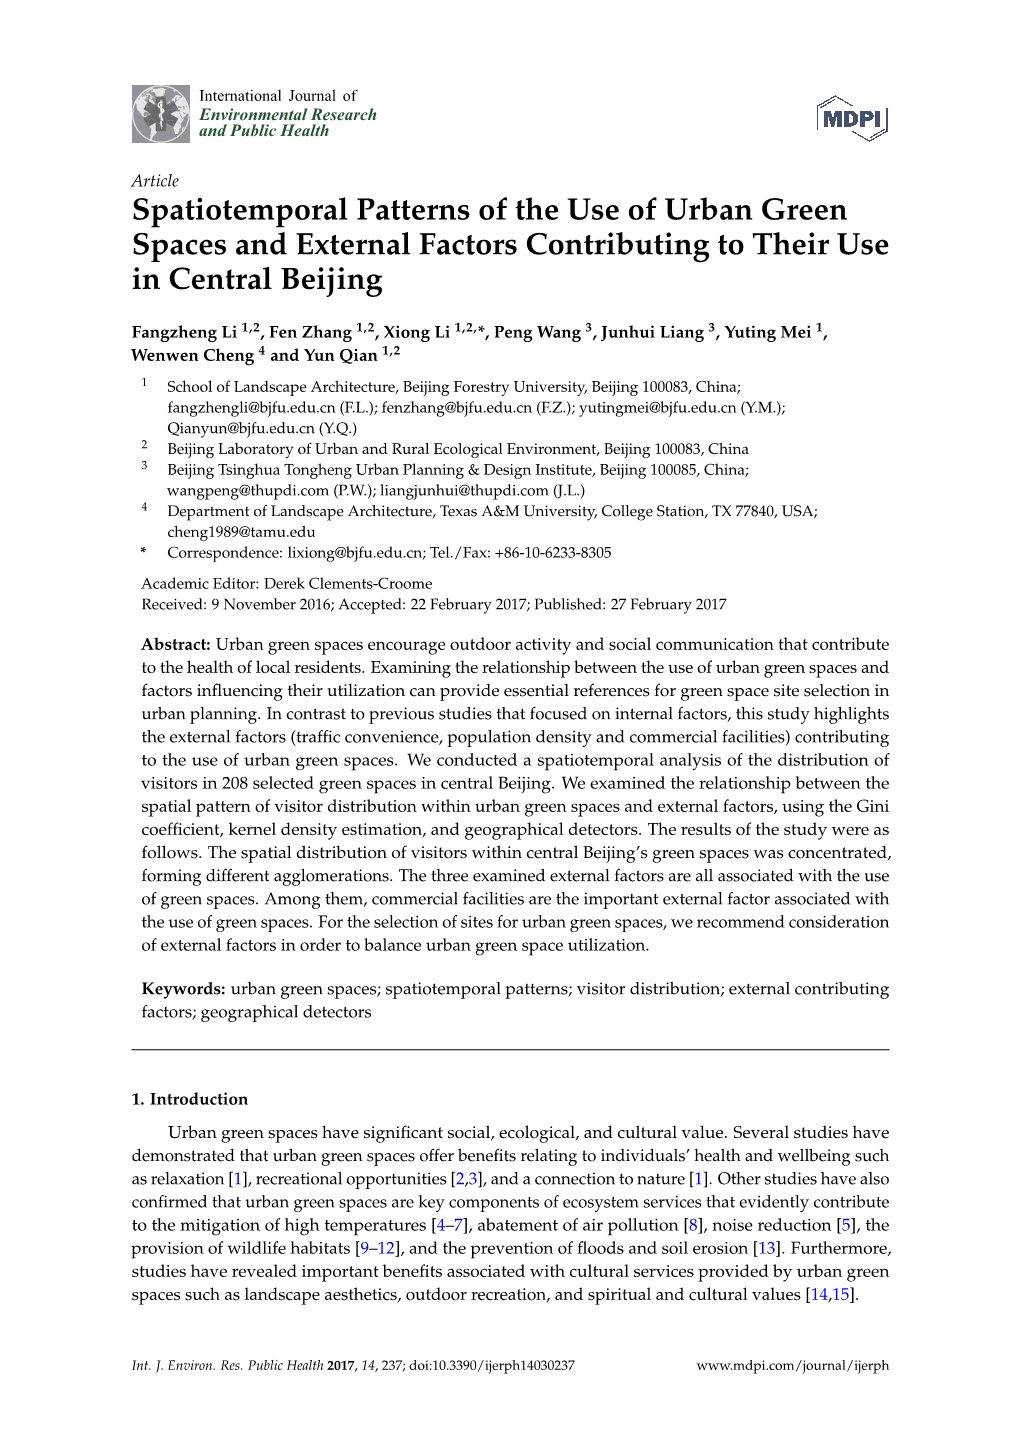 Spatiotemporal Patterns of the Use of Urban Green Spaces and External Factors Contributing to Their Use in Central Beijing